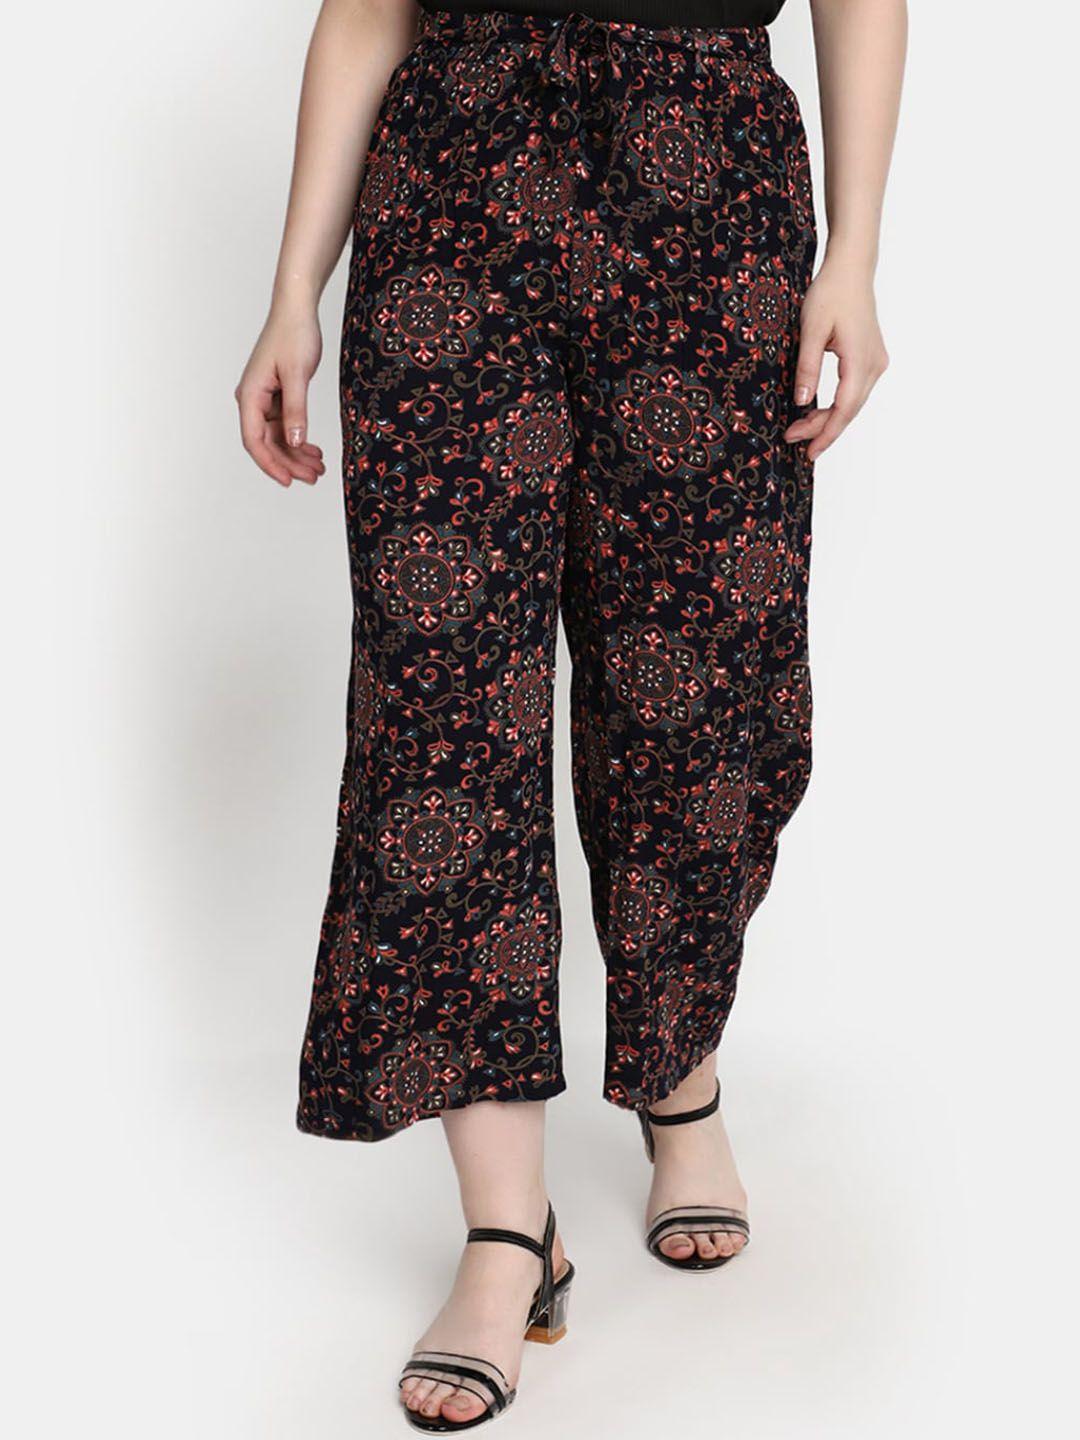 v-mart women floral printed parallel trousers